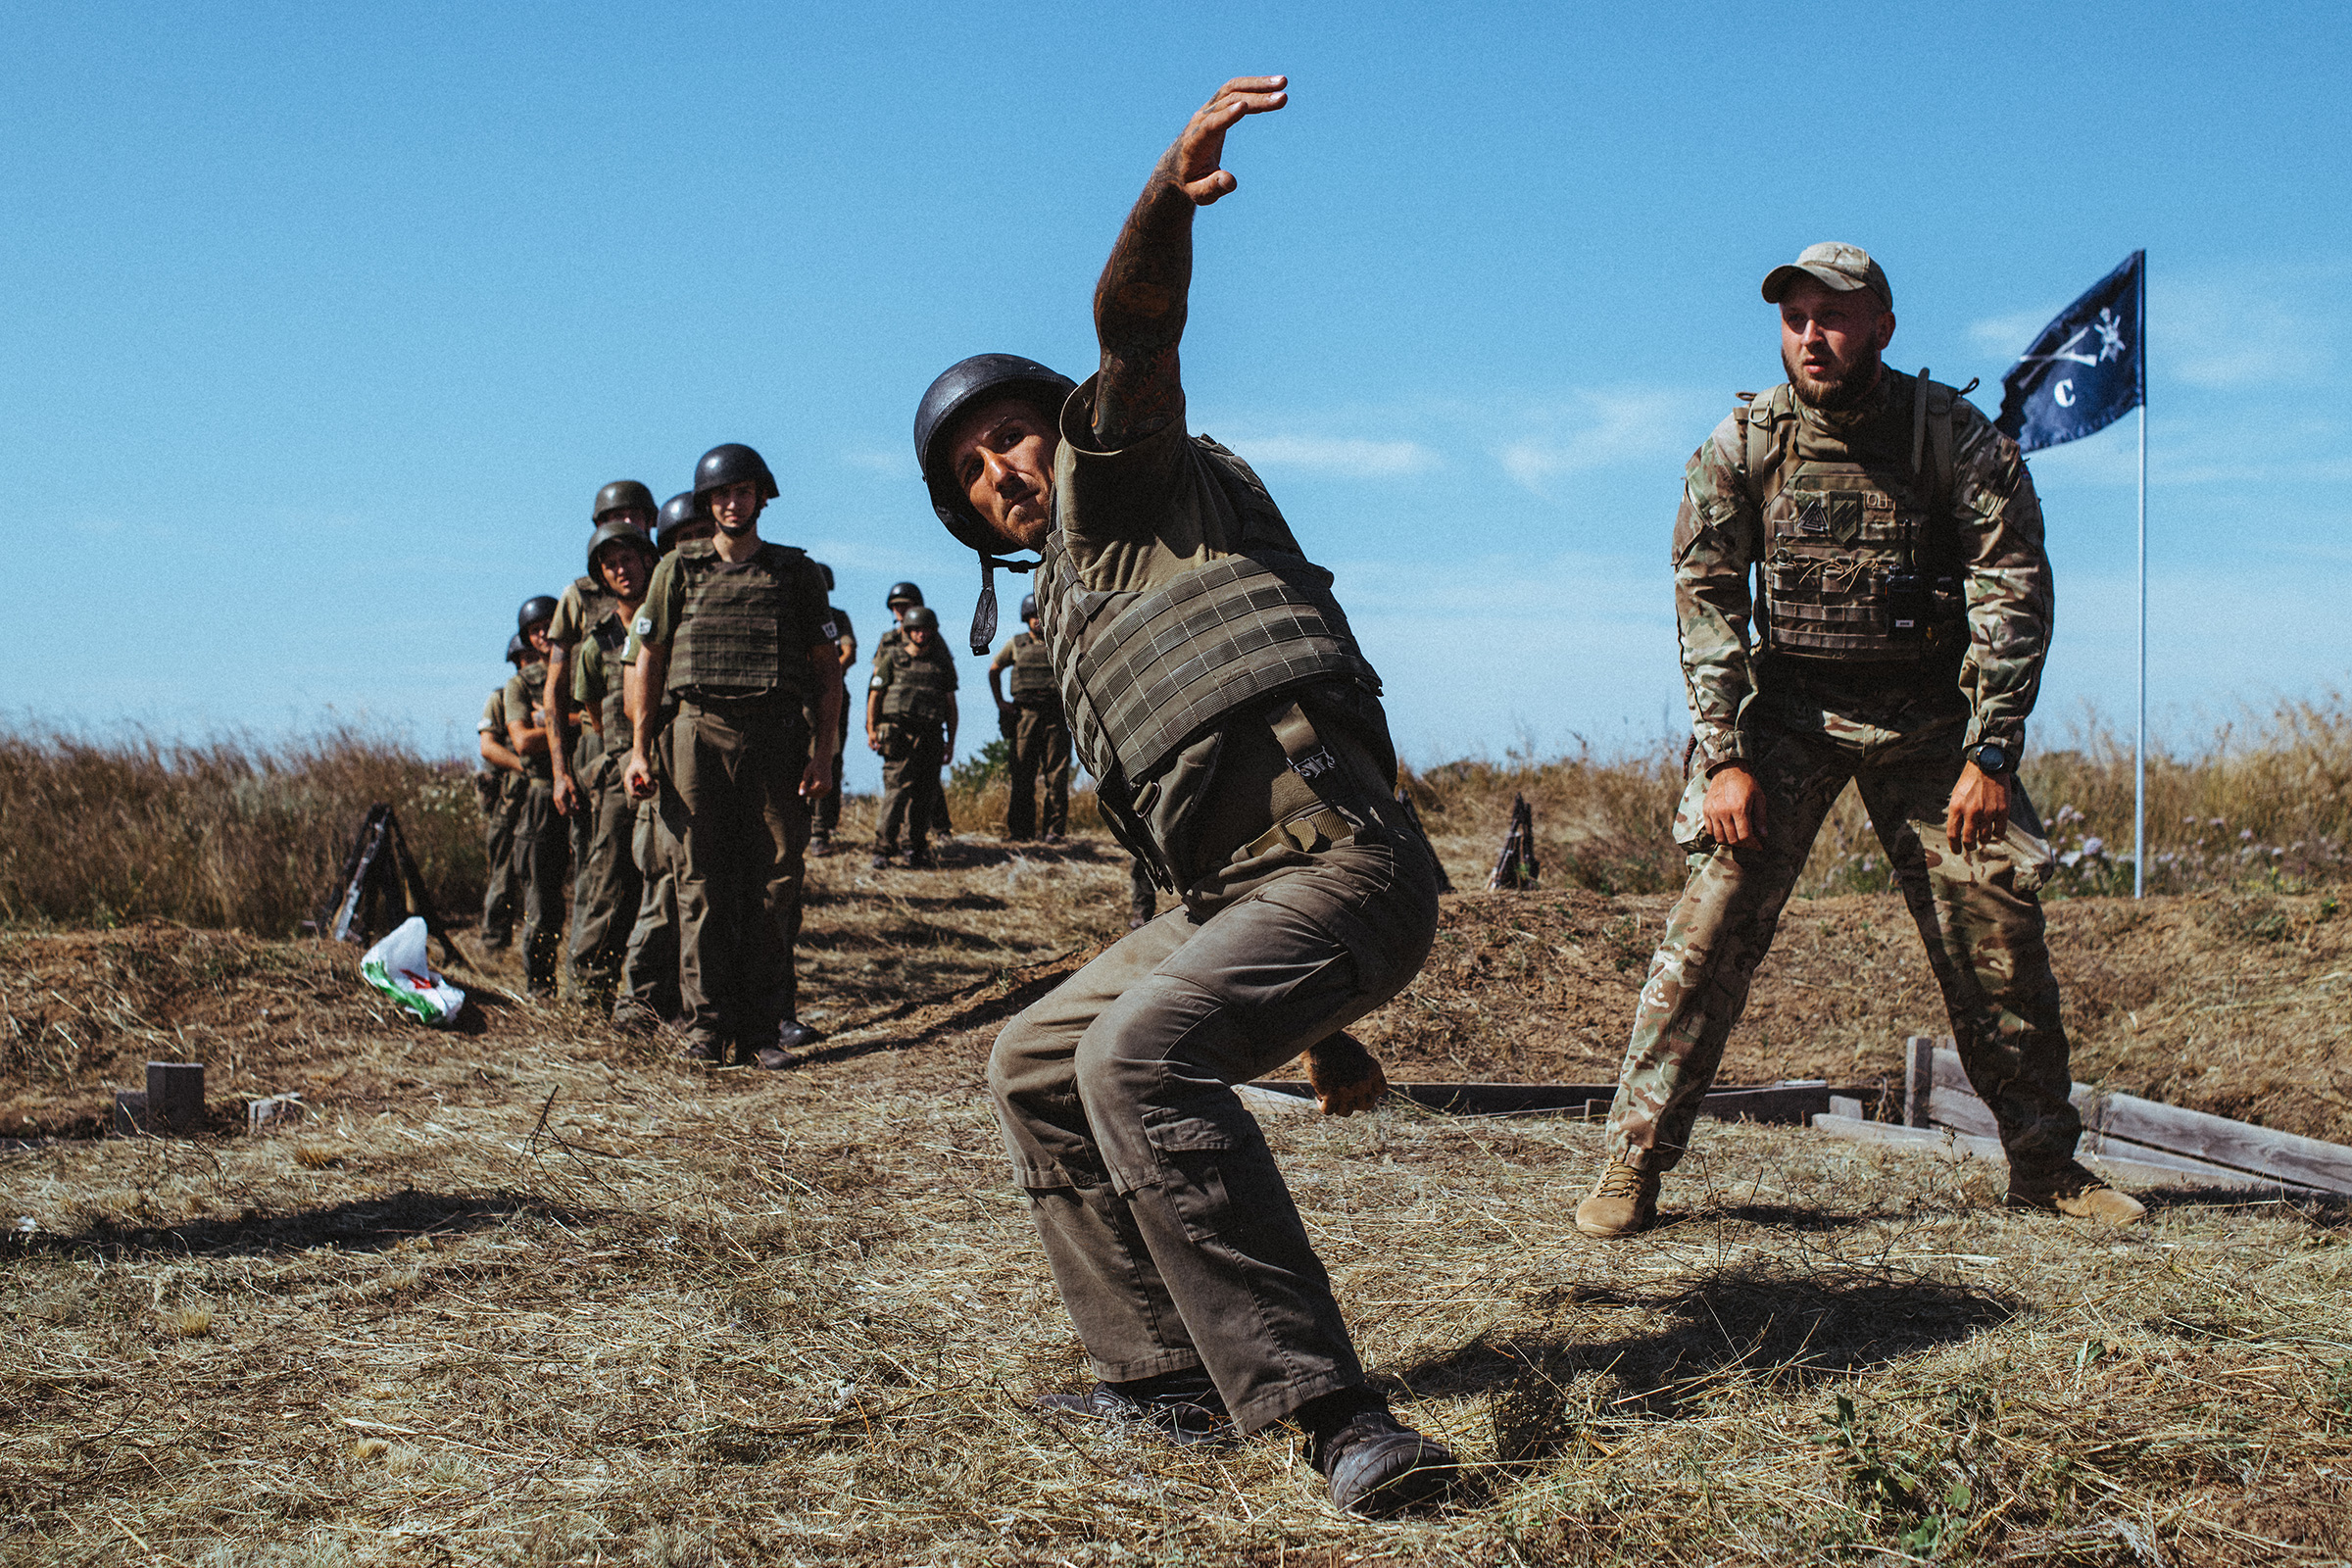 Recruits training in August 2019 with the military wing of Ukraine’s far-right Azov movement, which has inspired white supremacists from around the world. (Maxim Dondyuk for TIME)